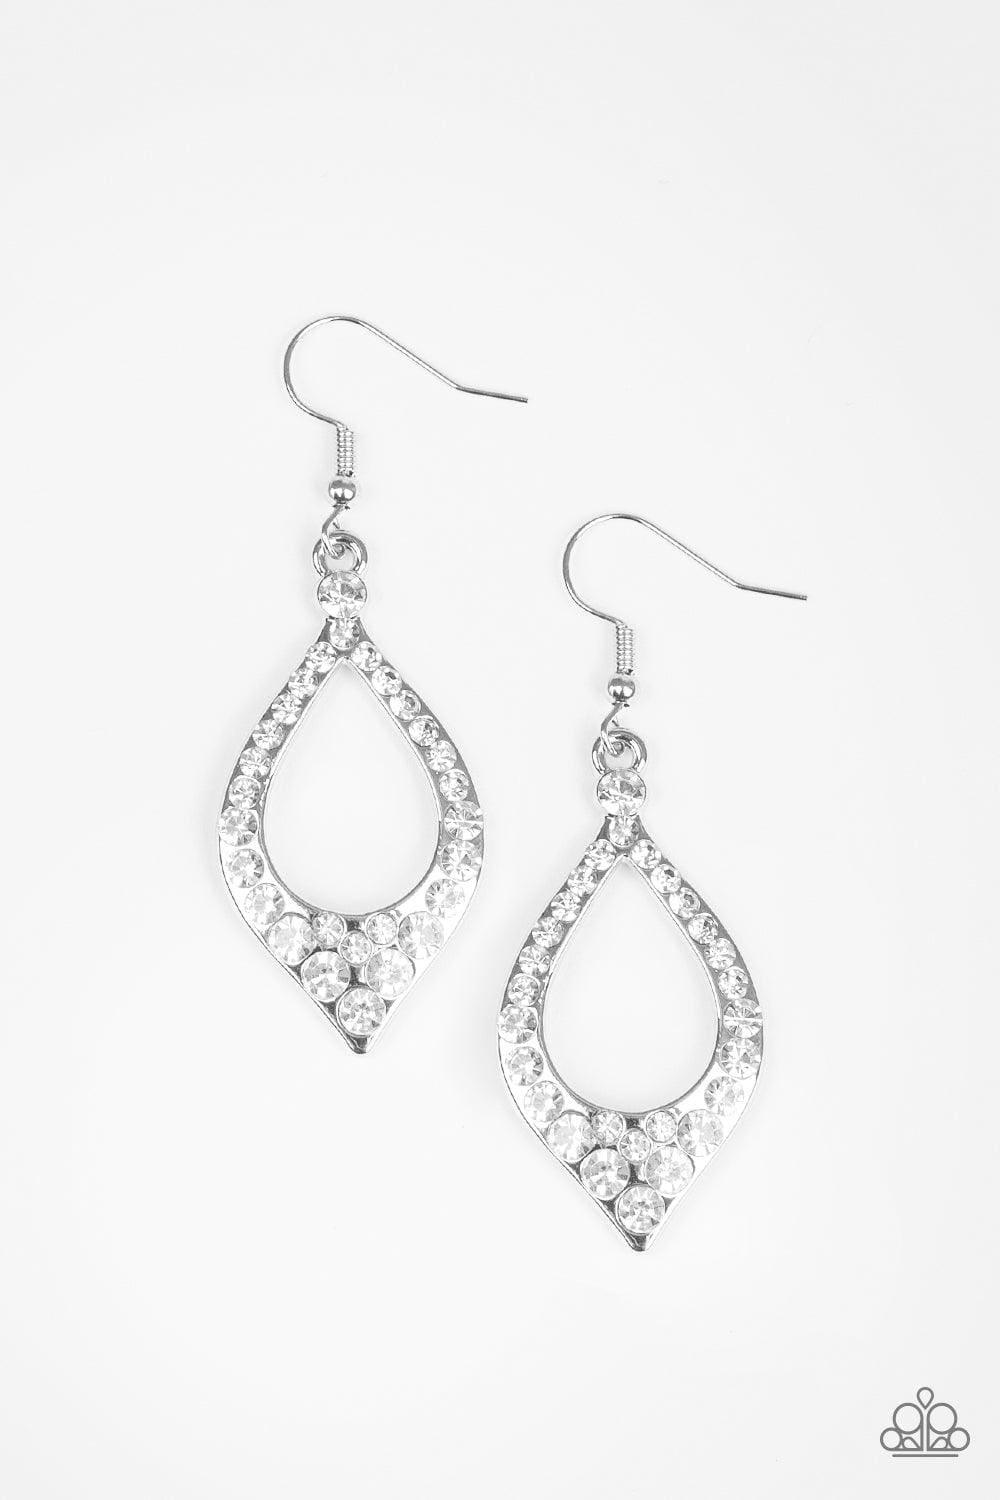 Paparazzi Accessories - Finest First Lady - White Earrings - Bling by JessieK